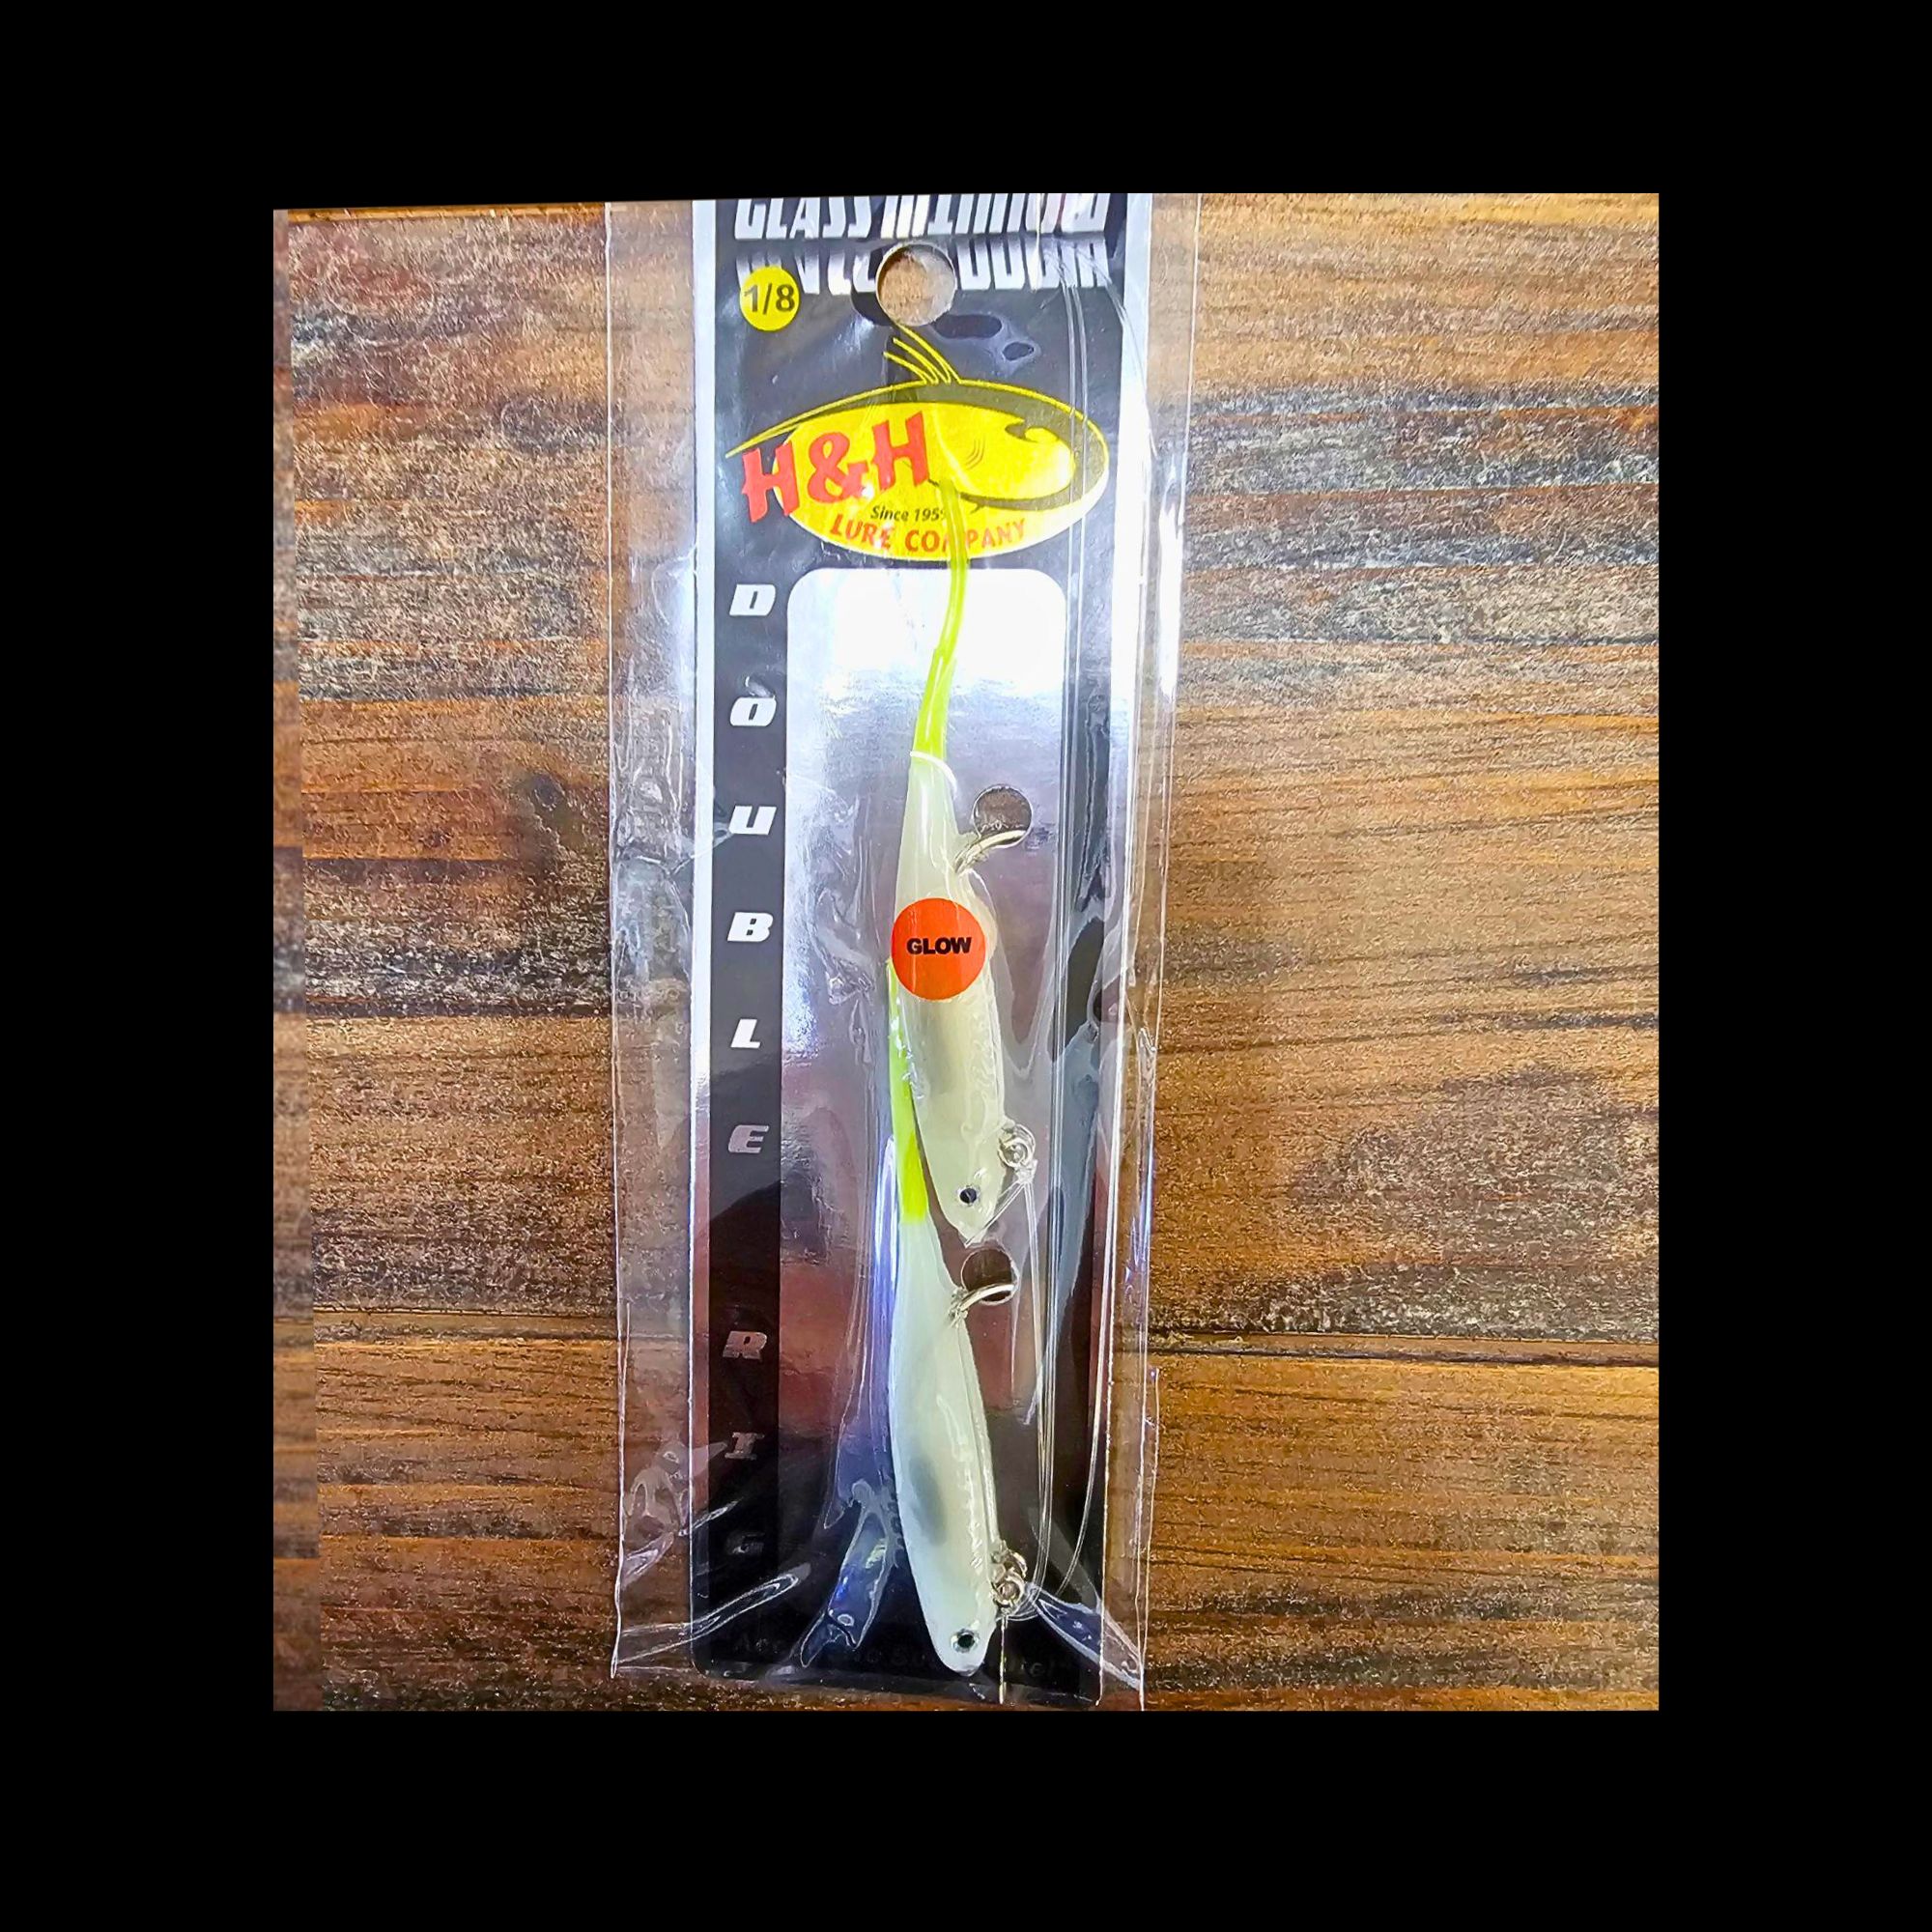 H&H Glass Minnow Double Rigs for Speckled Trout and Inshore Fishing Species  Glass Minnows Double Hook Rig